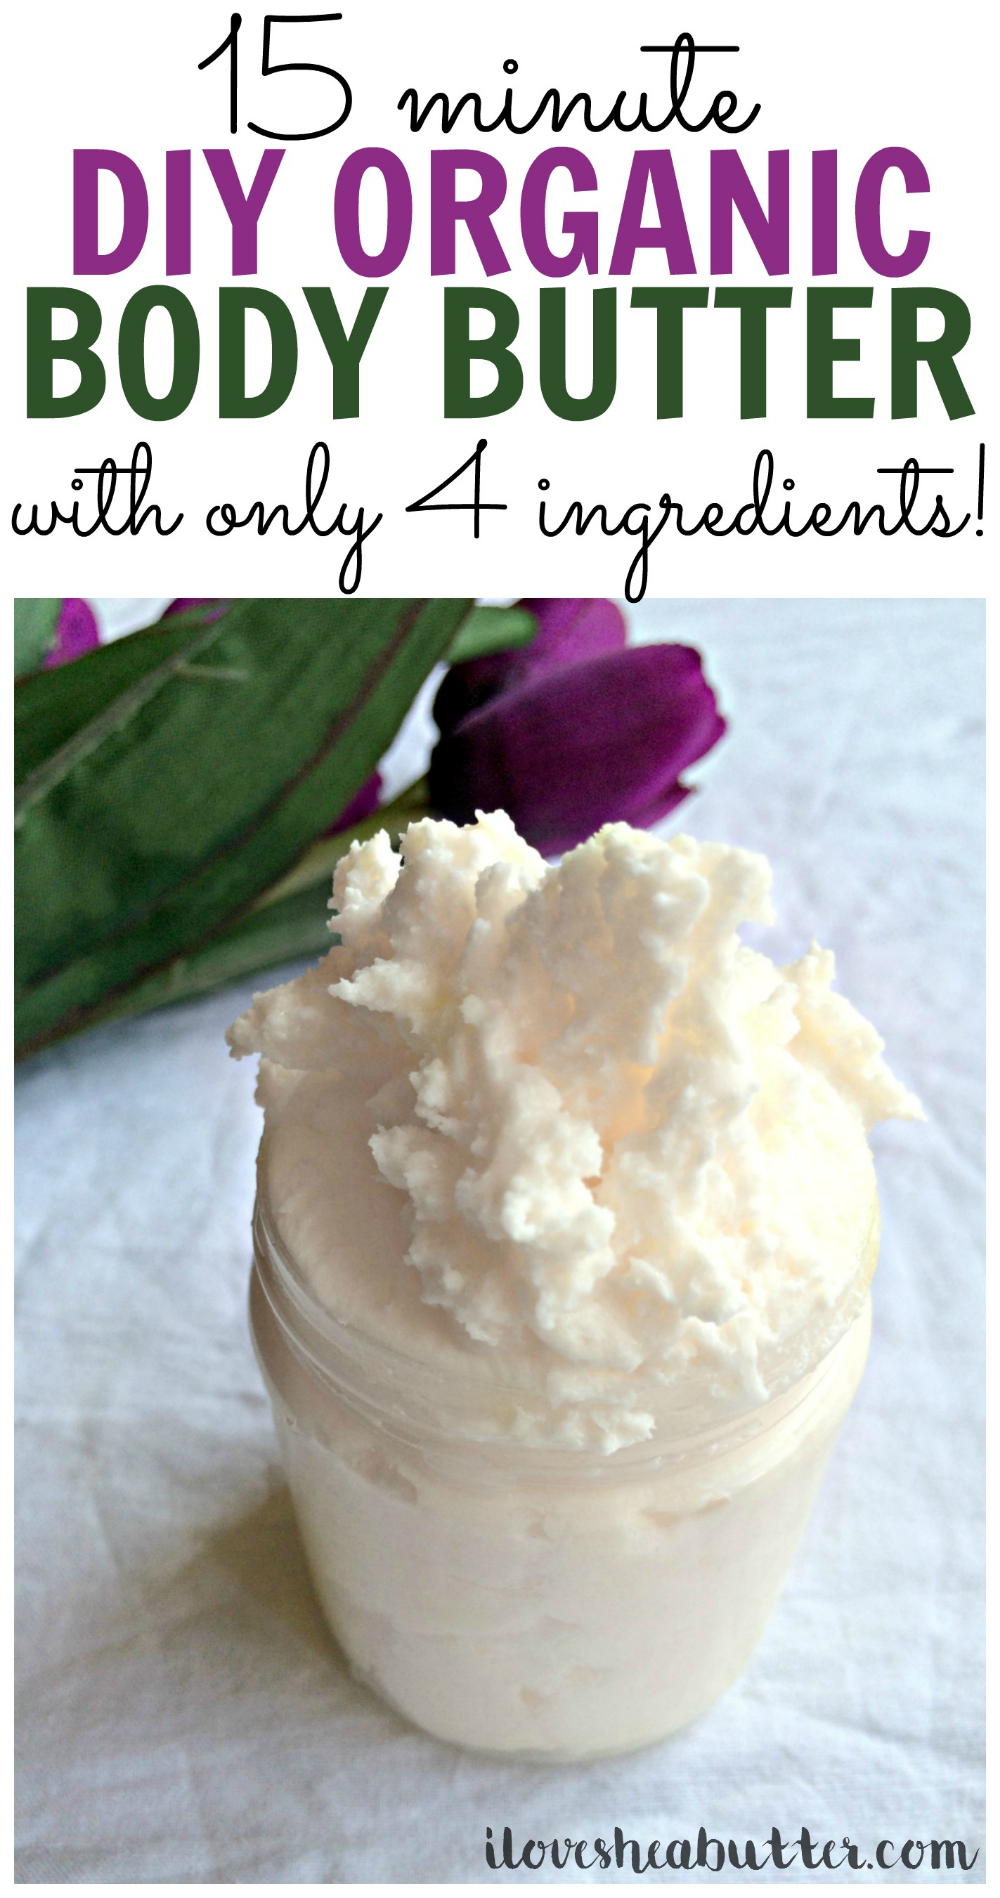 DIY Organic Body Butter for Healthy Skin - beautymunsta - free natural beauty hacks and more! - DIY Organic Body Butter for Healthy Skin - beautymunsta - free natural beauty hacks and more! -   18 beauty DIY natural ideas